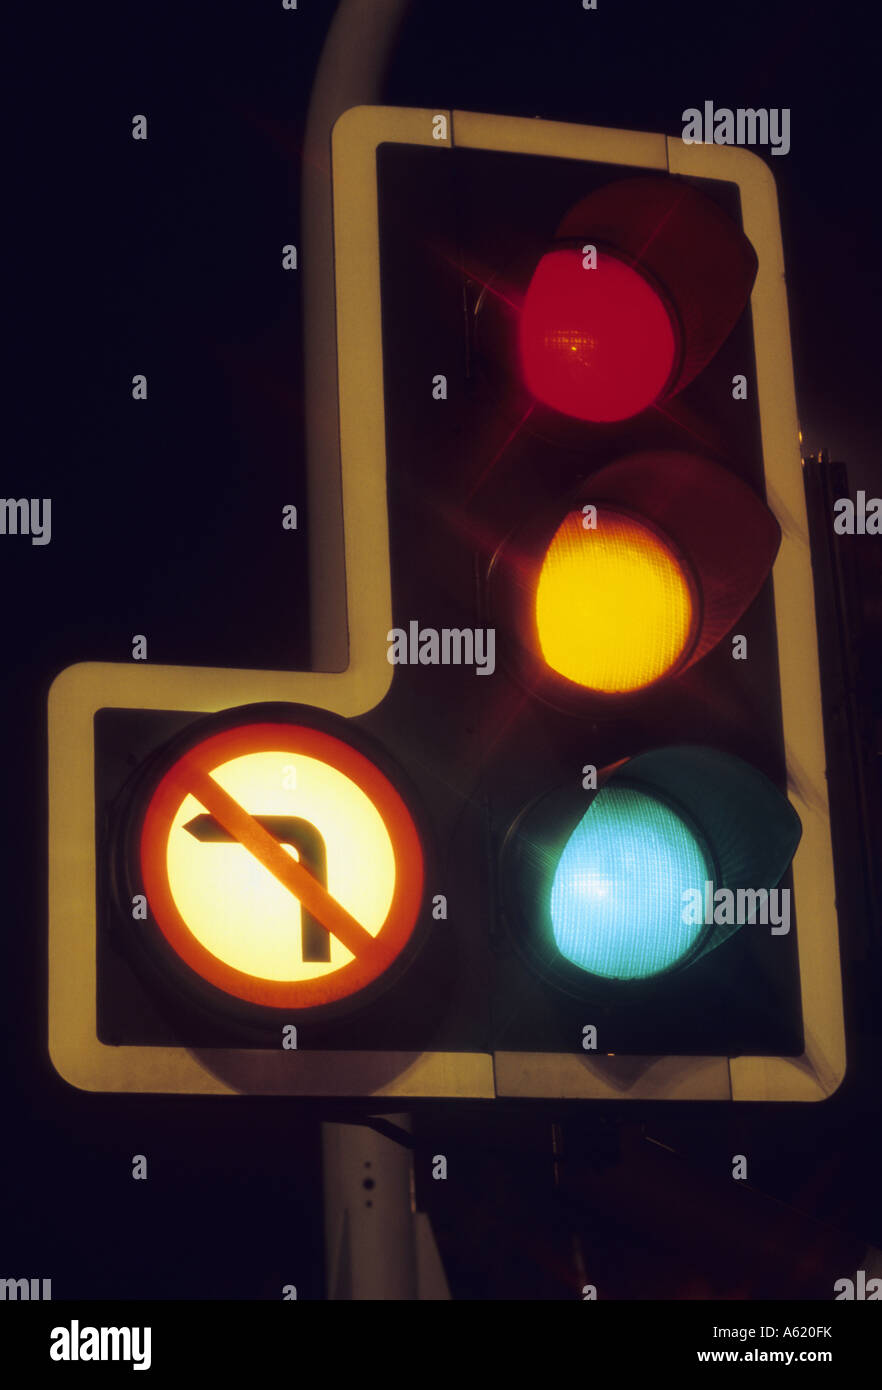 time exposure of traffic light showing red amber and green lights at night Leeds Yorkshire UK Stock Photo